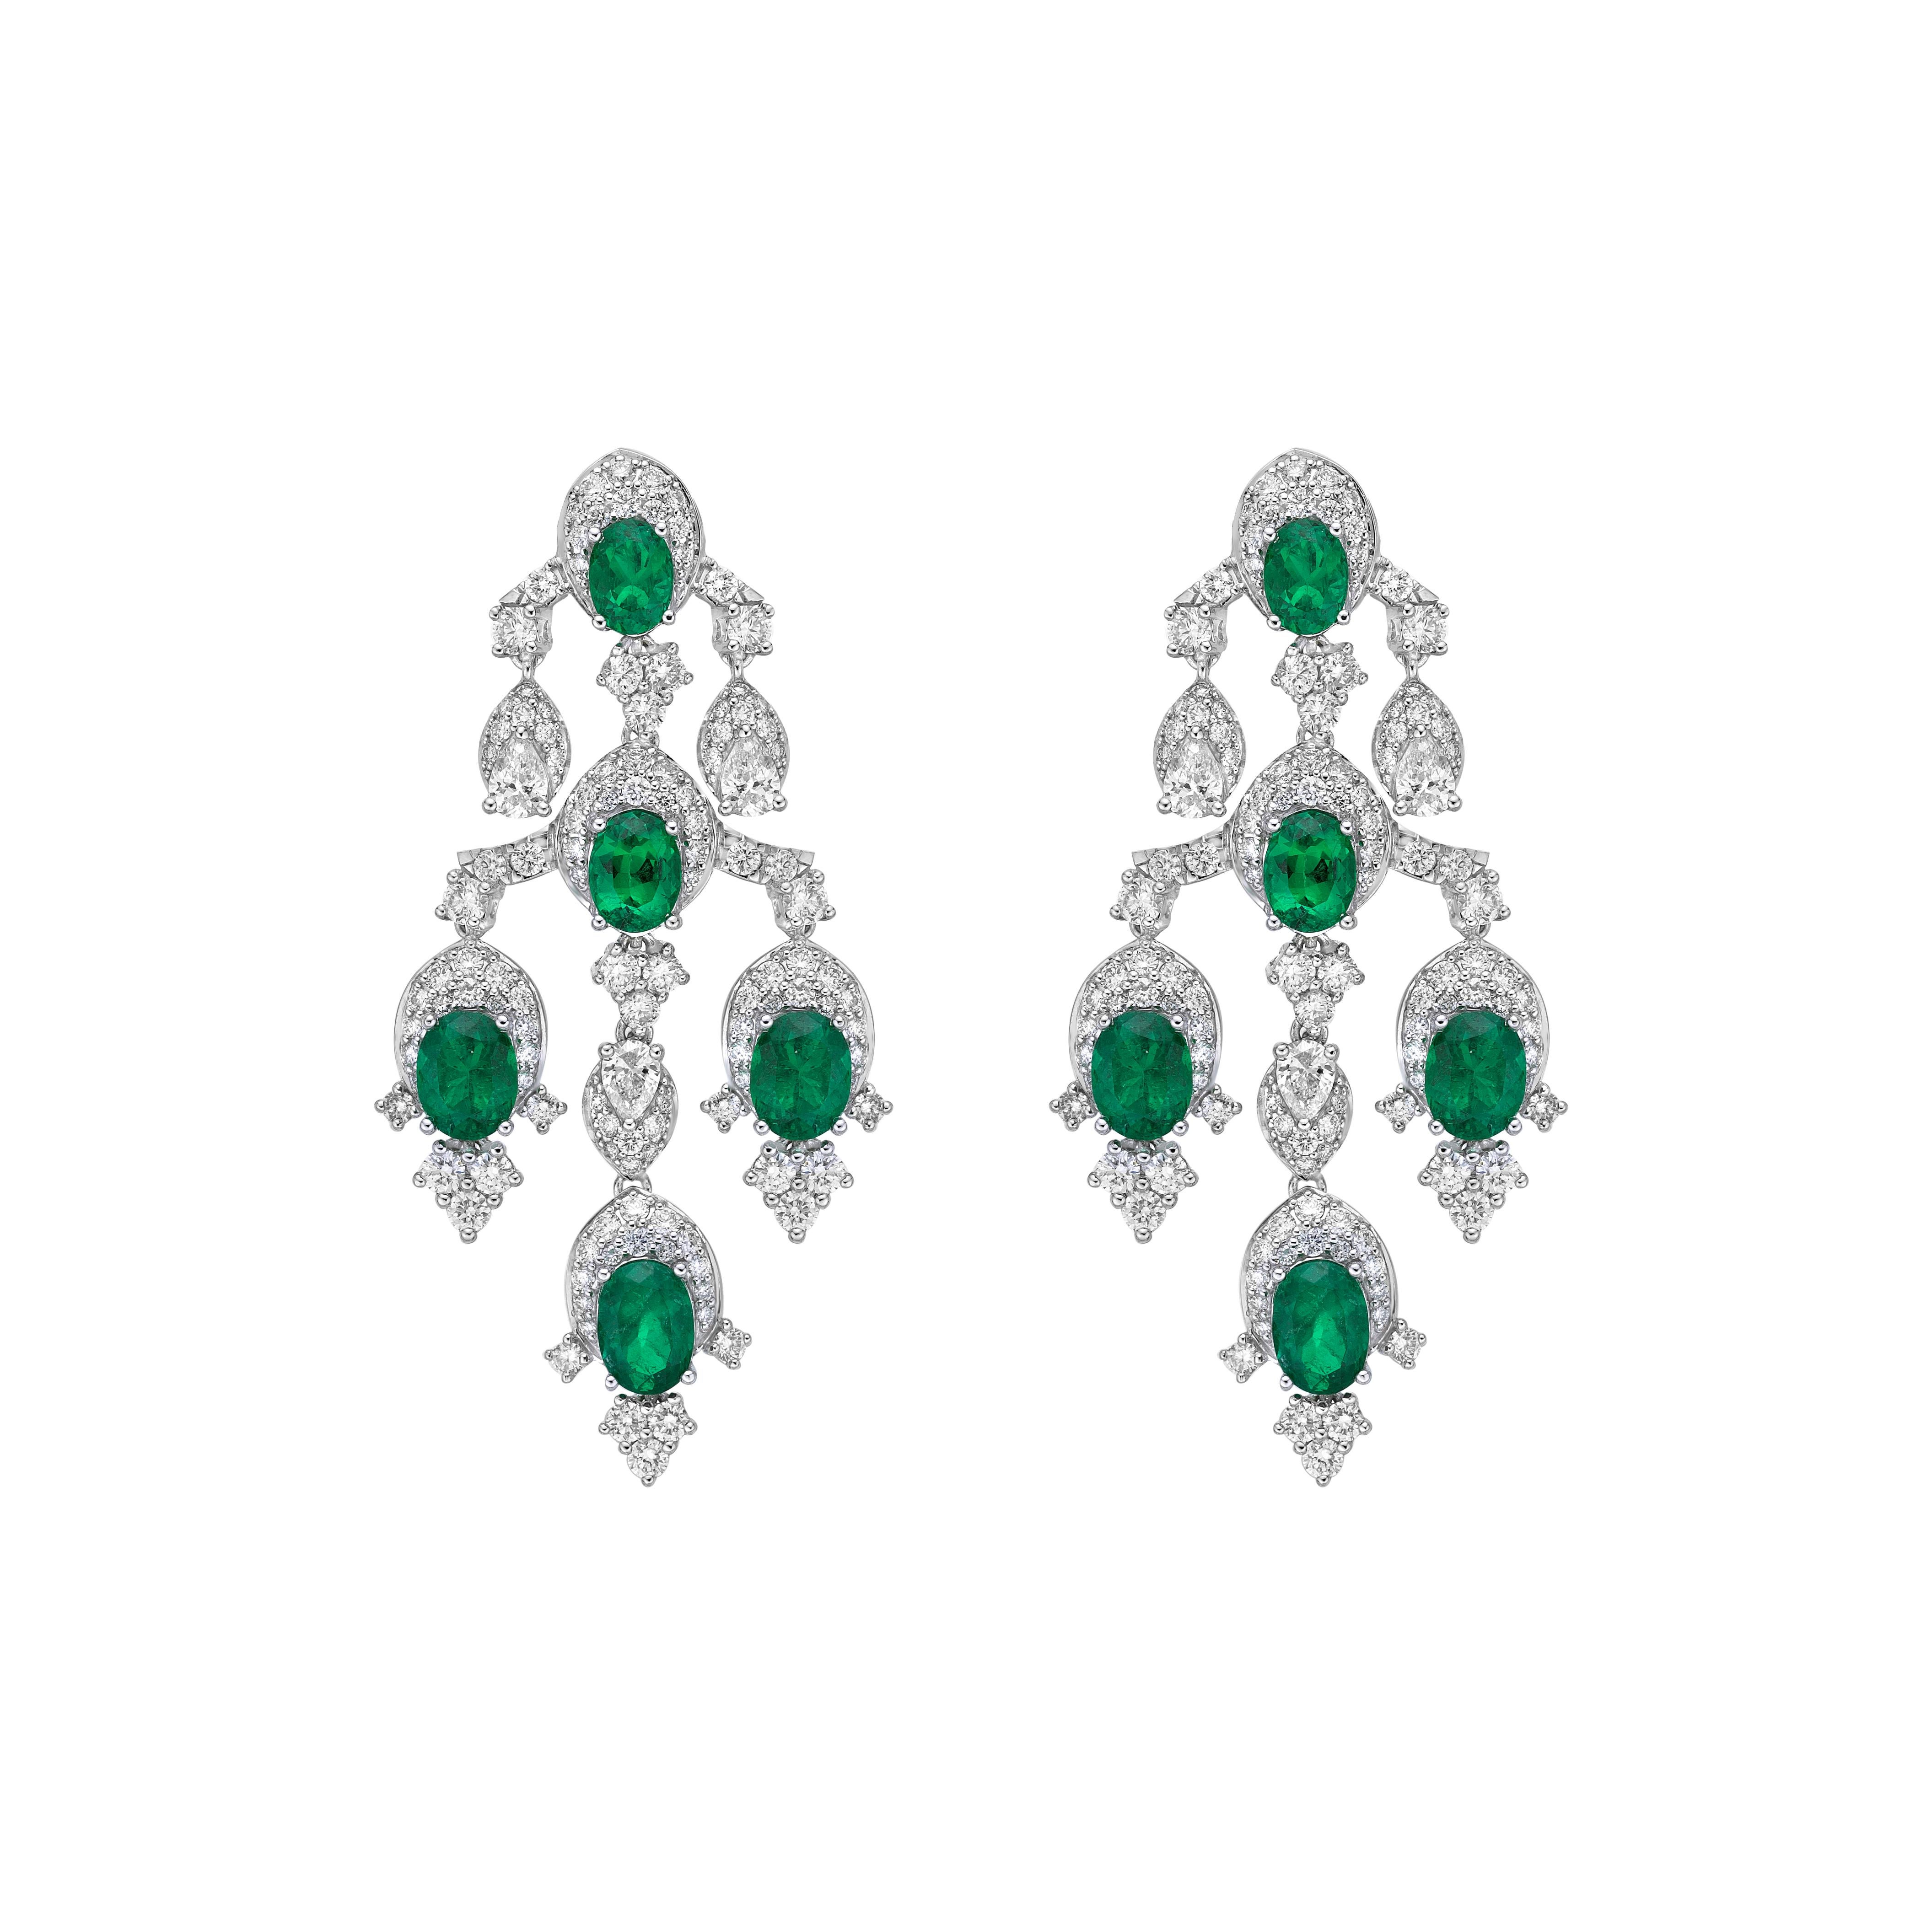 Oval Cut Contemporary Emerald Earrings in 18 Karat White Gold with Diamond For Sale